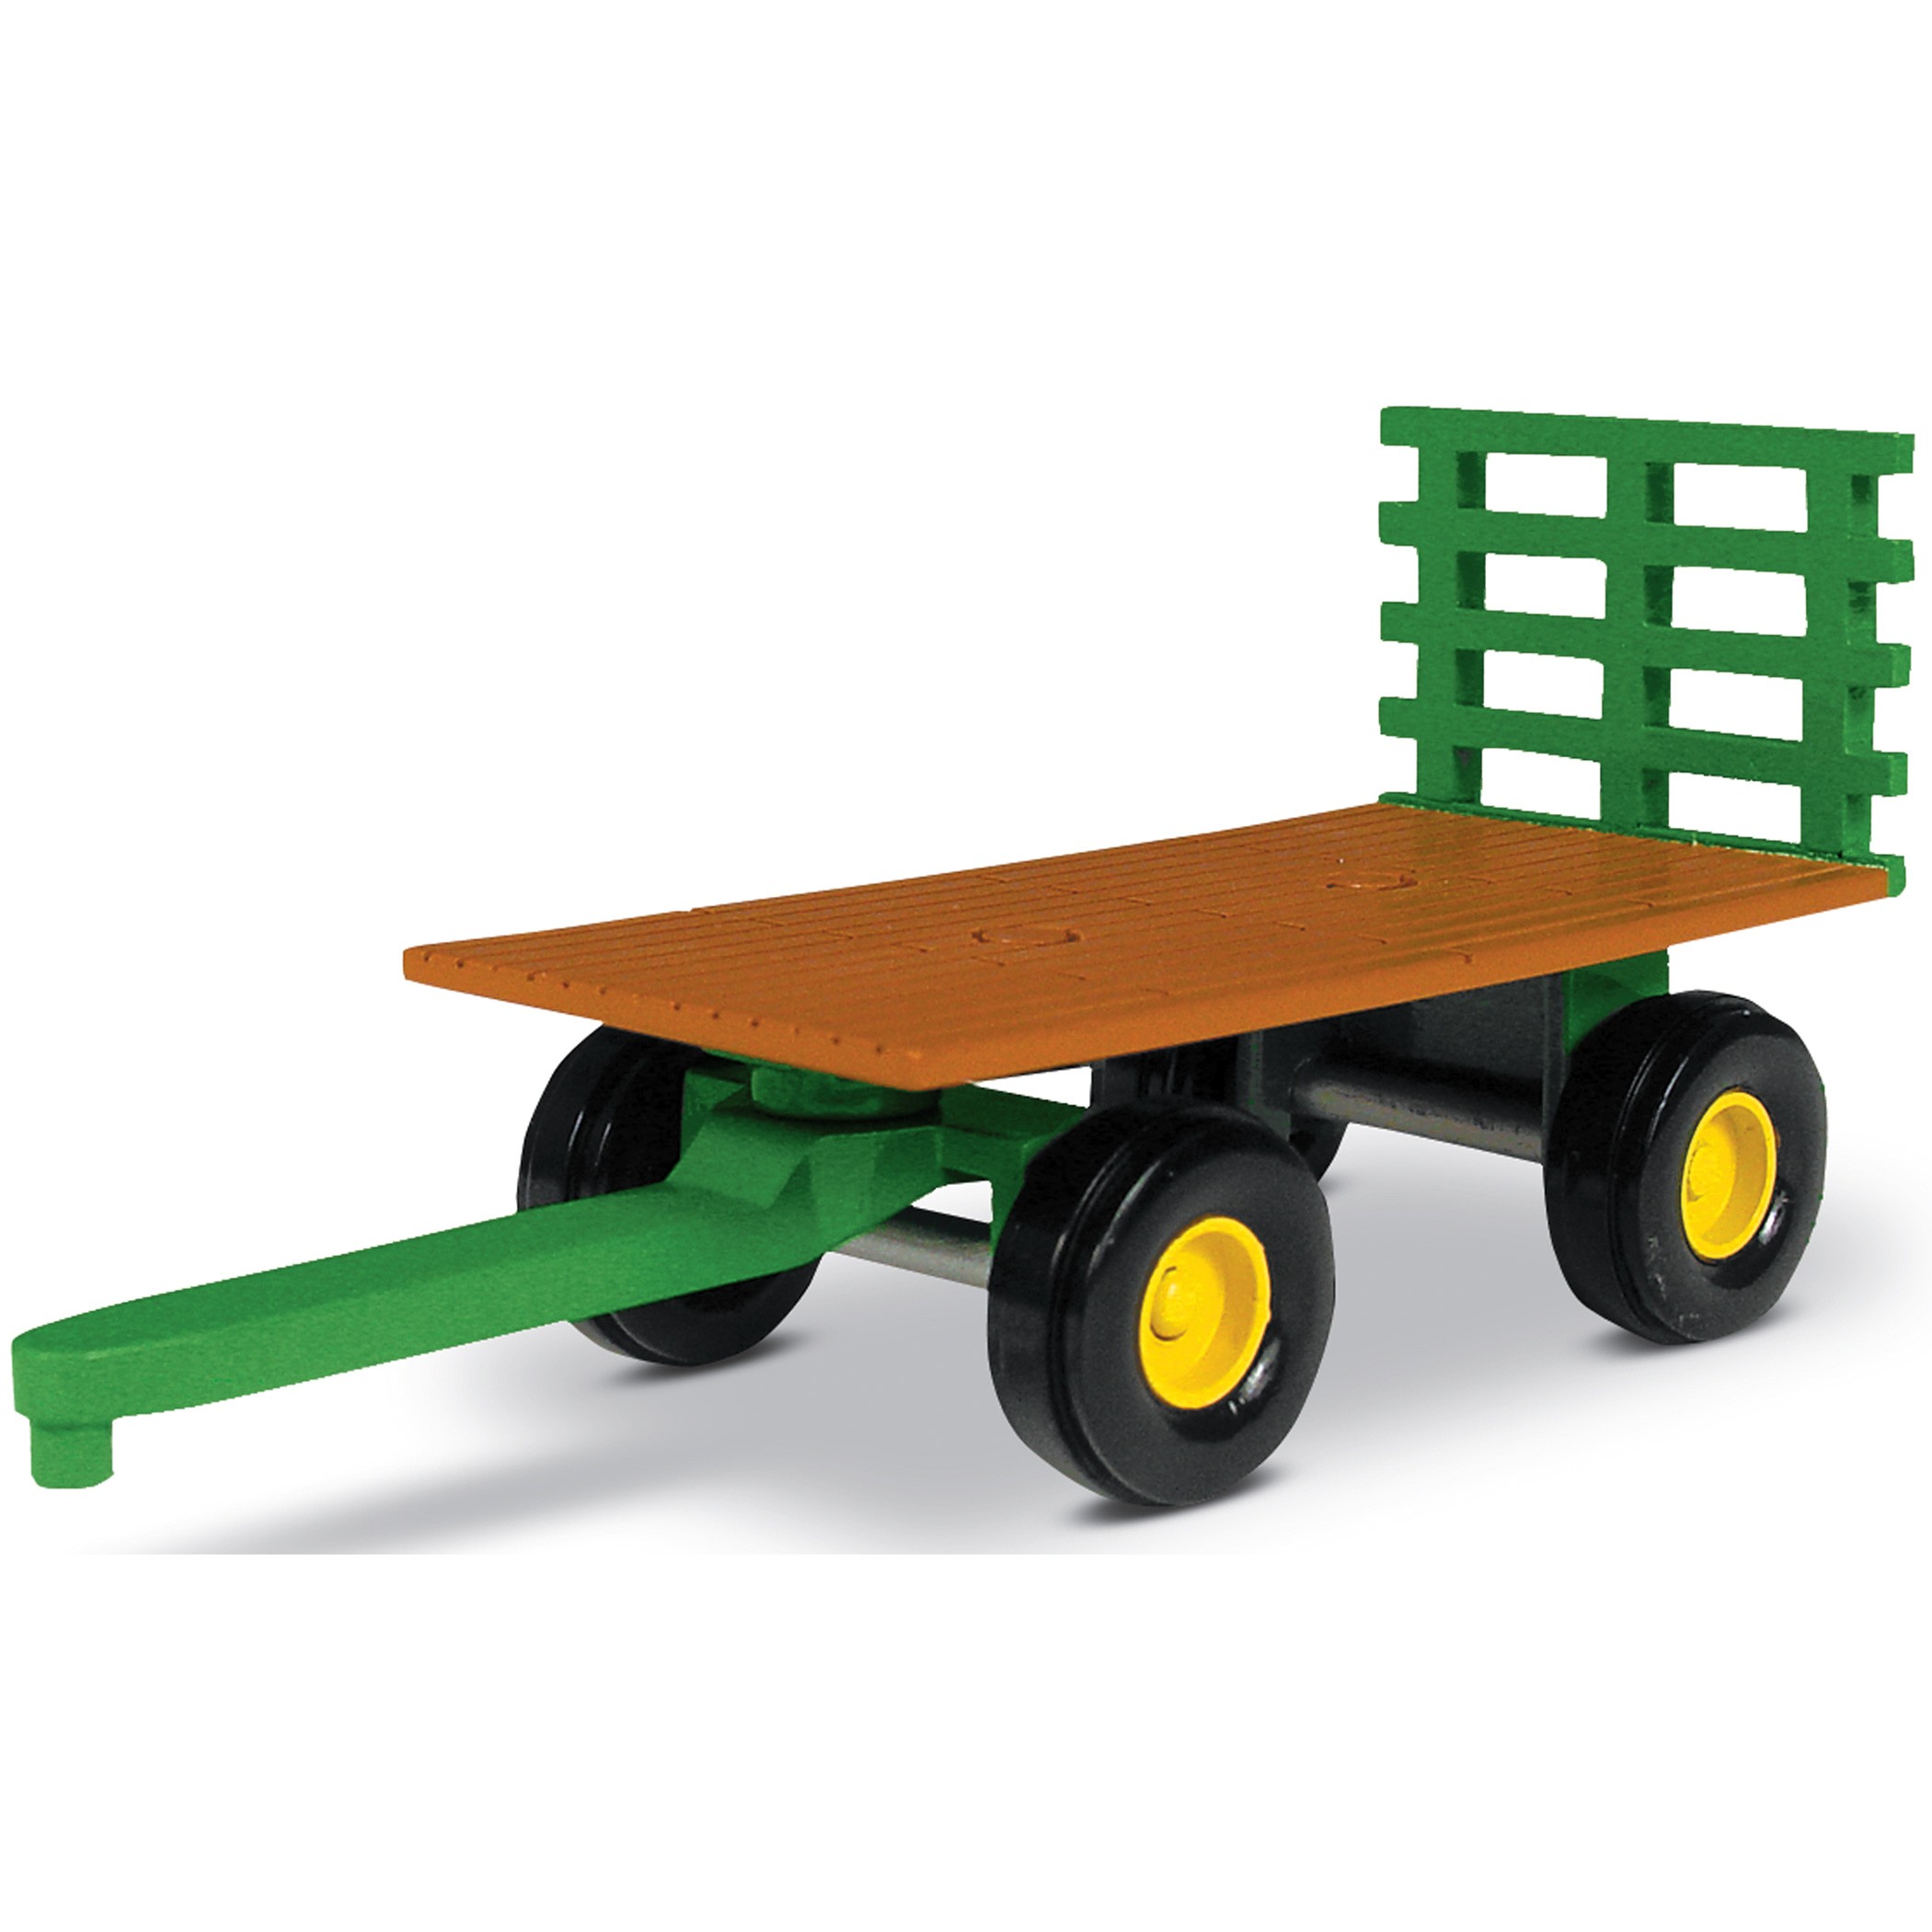 What is the best John Deere Toy Hay Wagon?